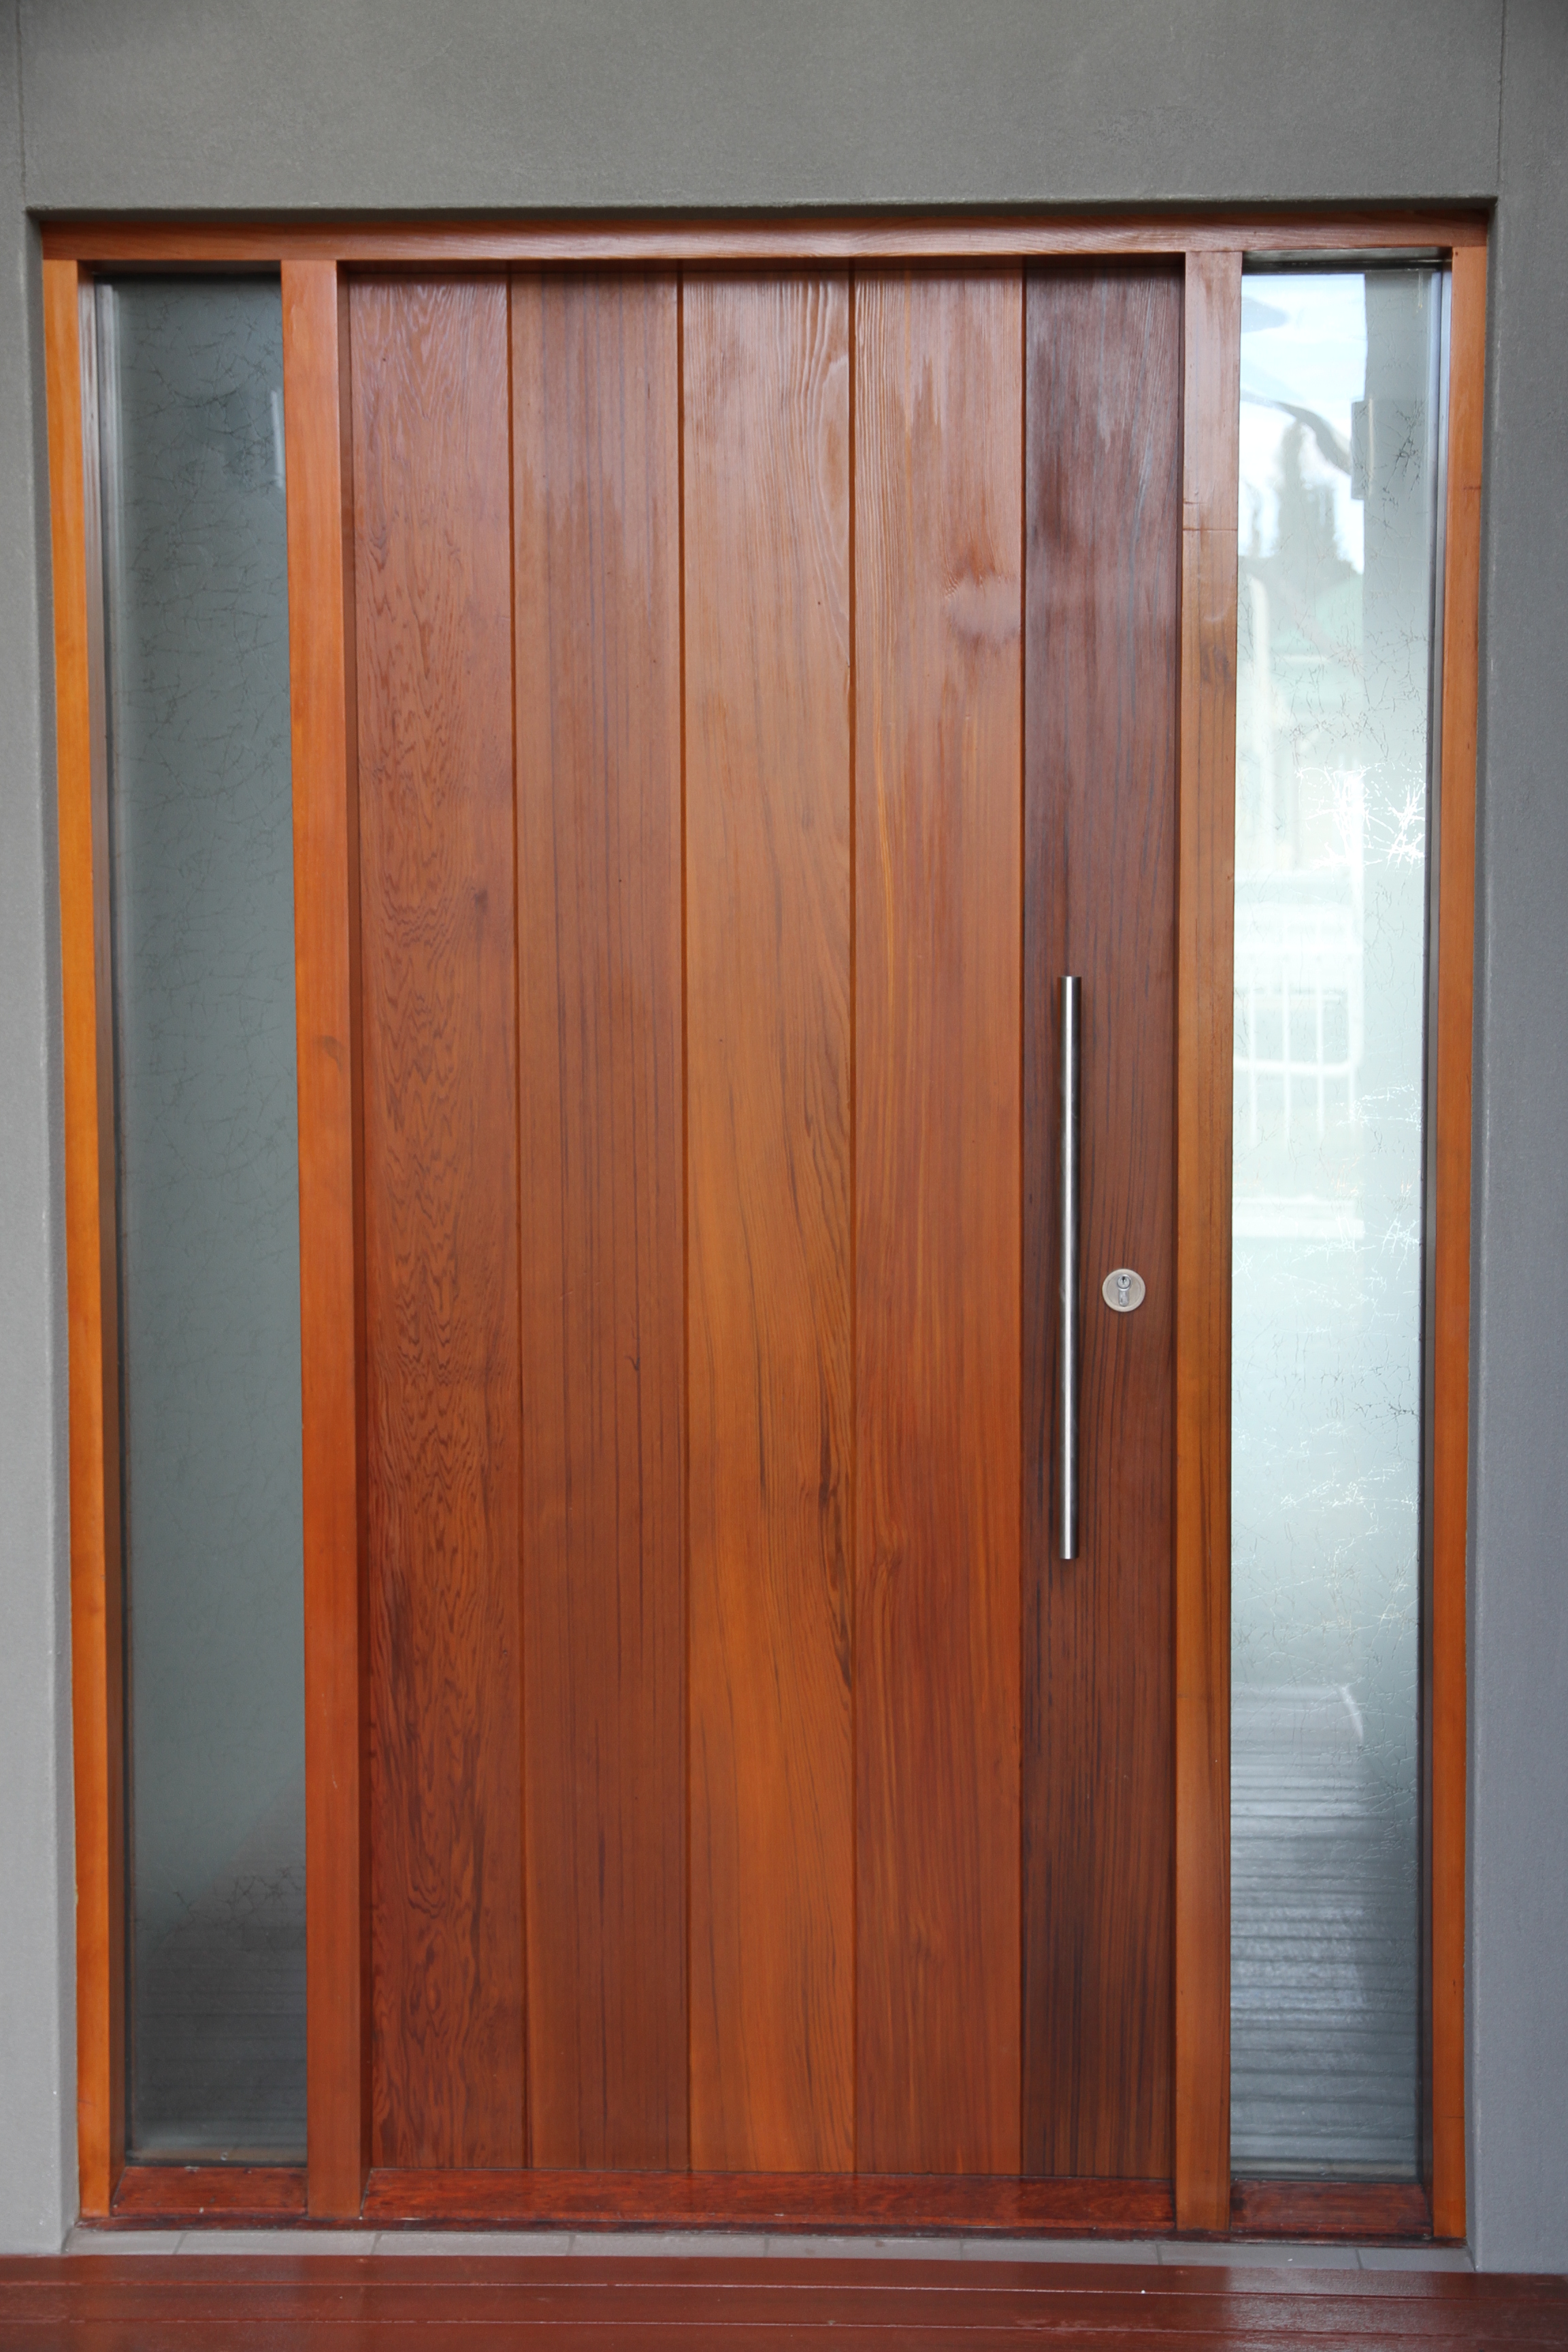 Vertical Plank Door 64mm with Triple Glazed Rice Paper Sidelights - Exterior View